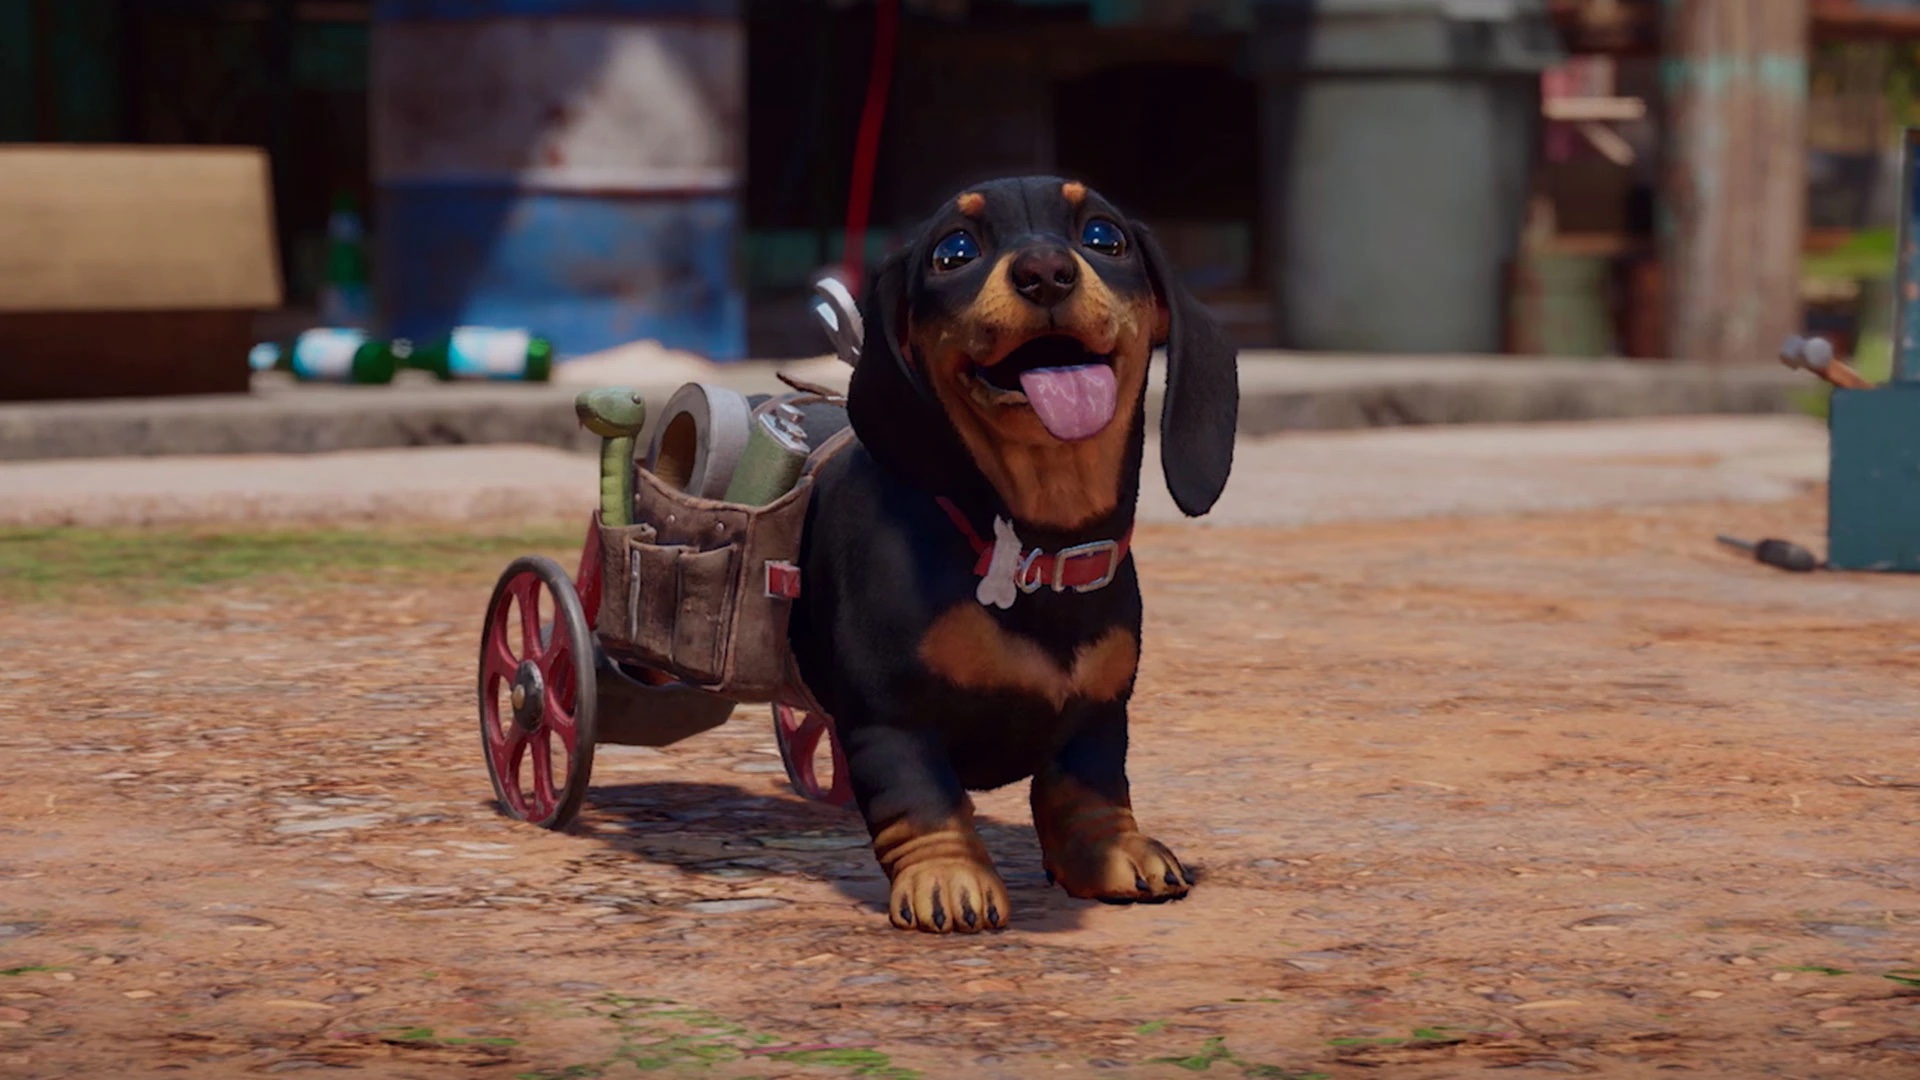 Far Cry 6 DLC includes a Stranger Things-inspired wiener dog rescue mission